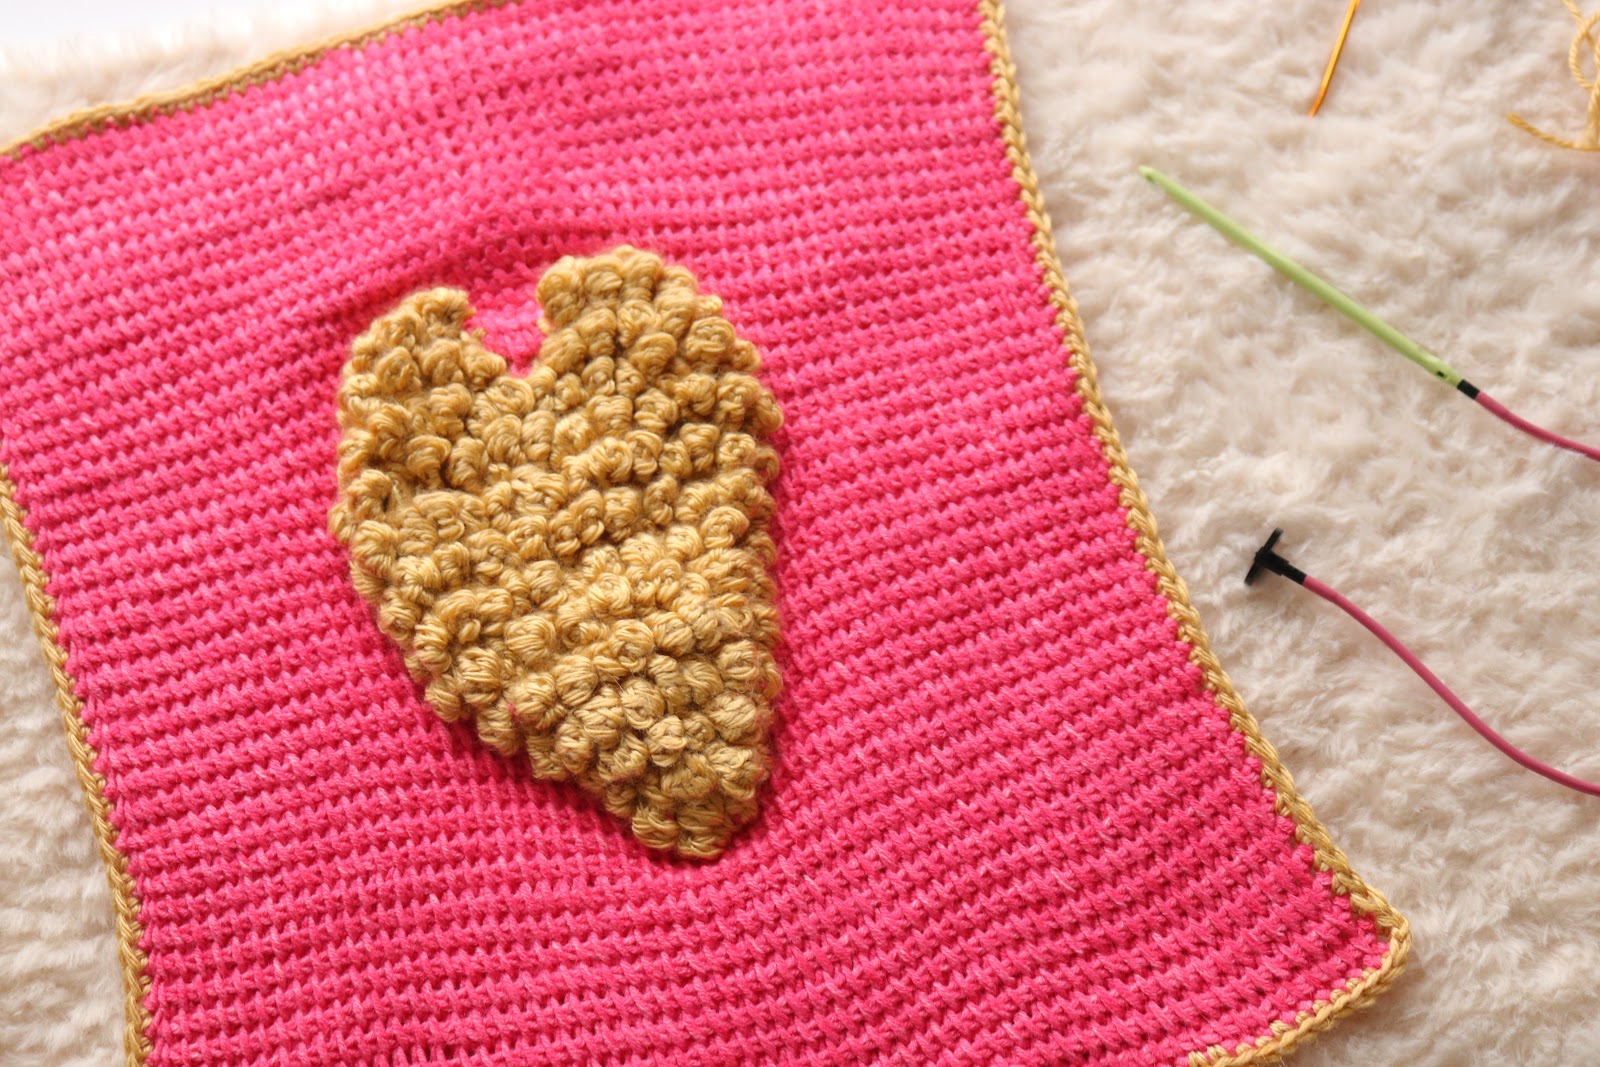 Need free bobble stitch crochet patterns? You are in the right place. Check out this fun Tunisian crochet bobble stitch heart square pattern!